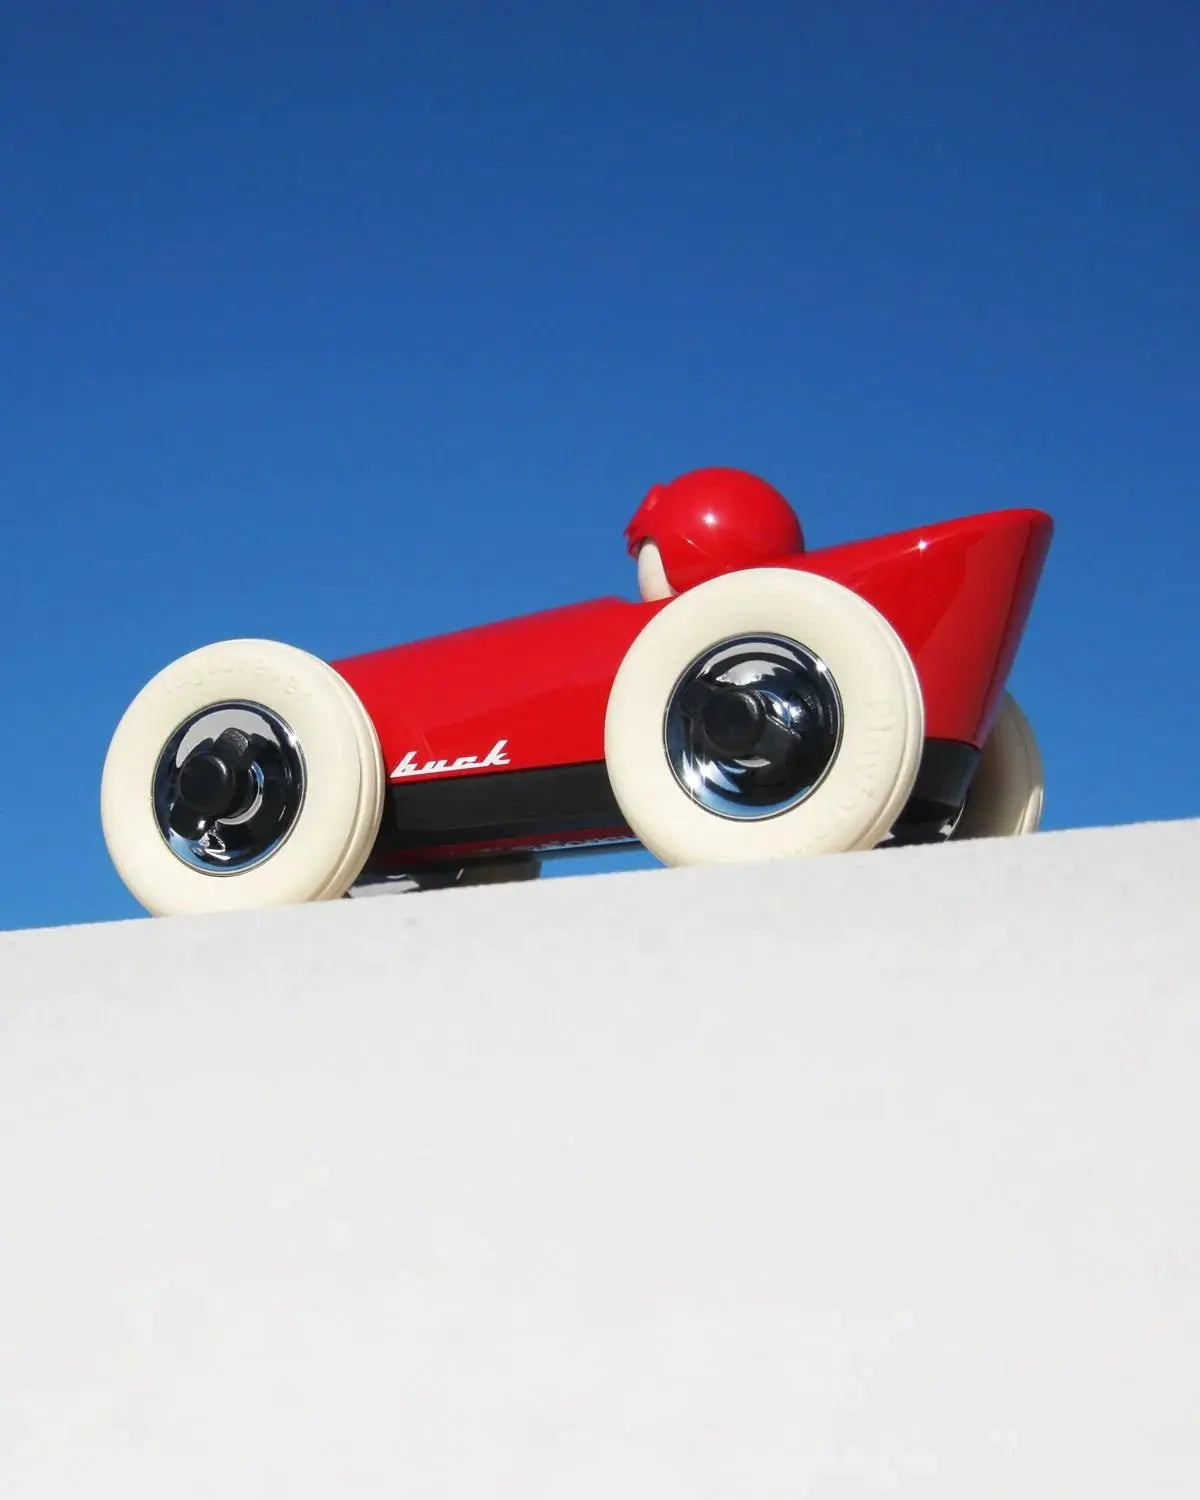 Dark Orange Car Verve Malibu, Wide Profile Design, Low-to-the-Ground Rubber Tyres, Collectible Toy Car  Playforever Red  